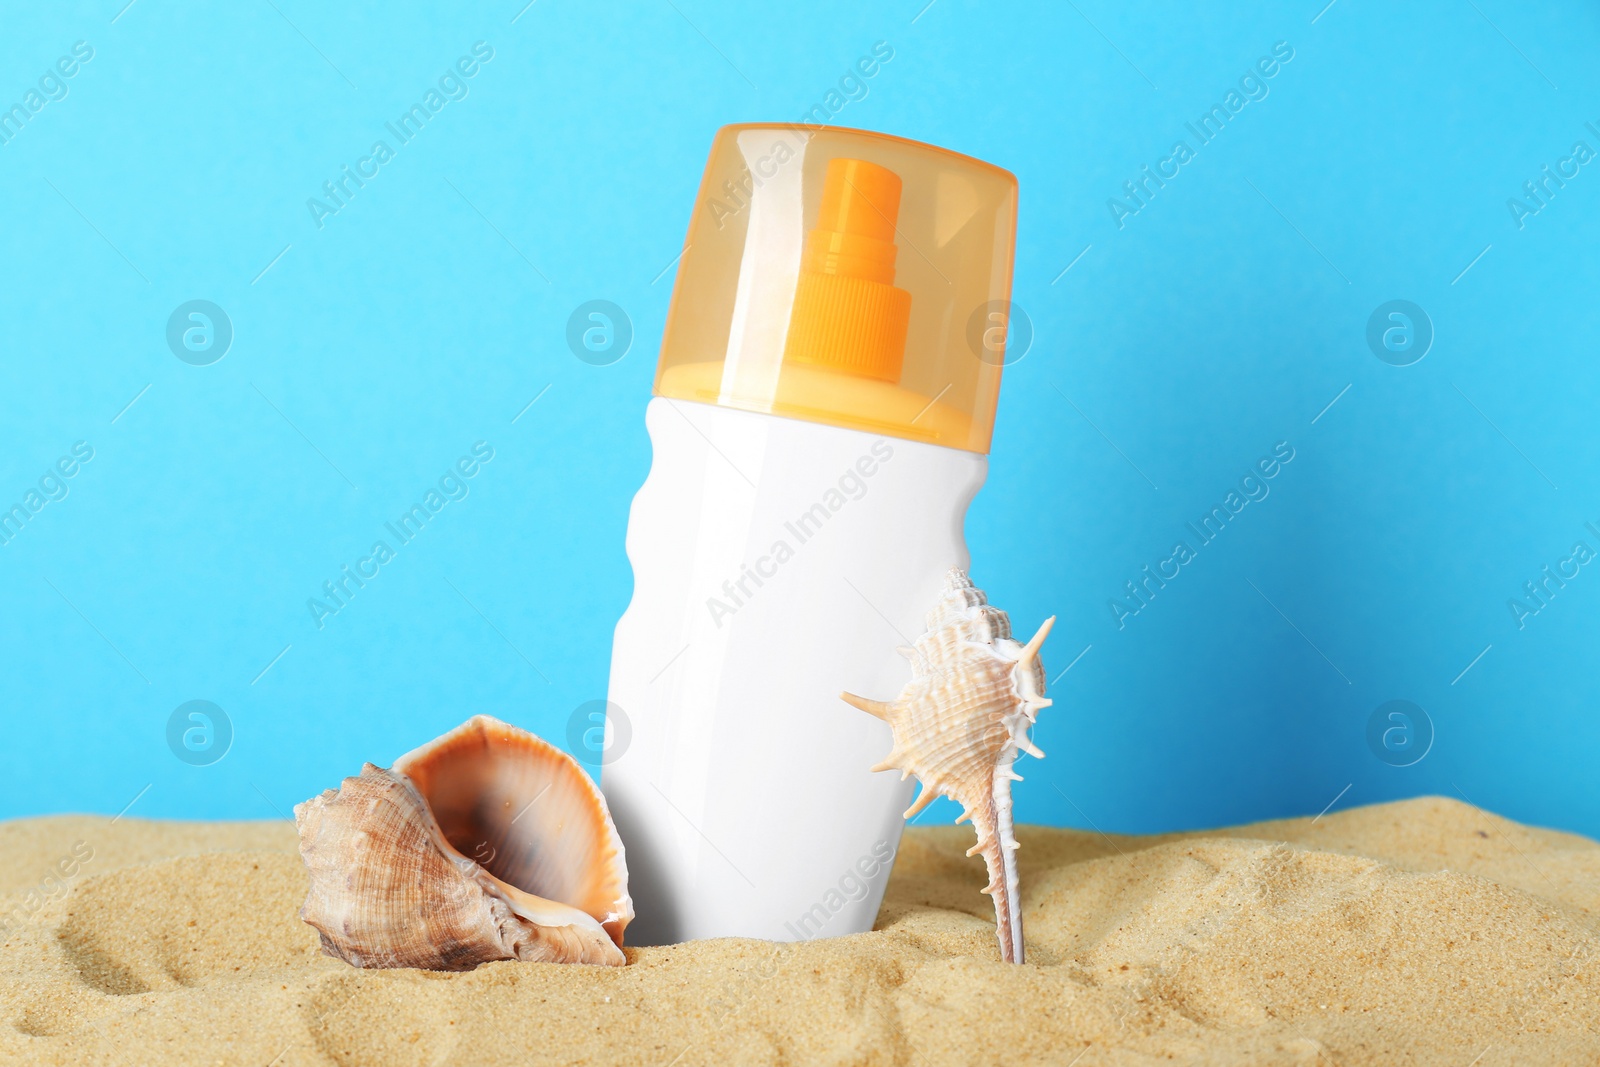 Photo of Suntan product, seashell and starfish on sand against light blue background